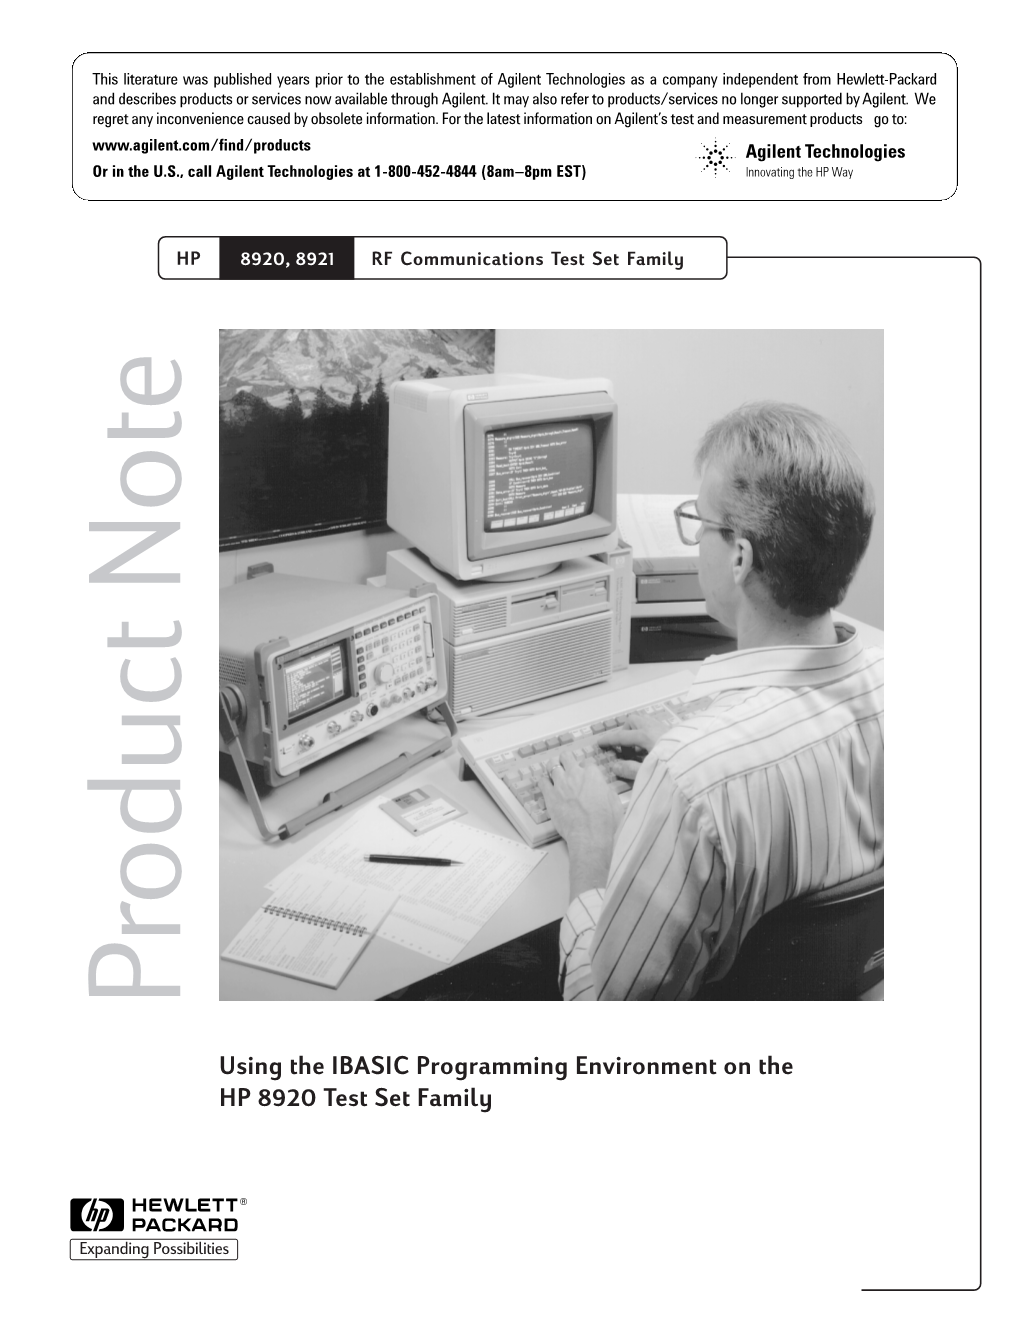 Using the IBASIC Programming Environment on the HP 8920 Test Set Family